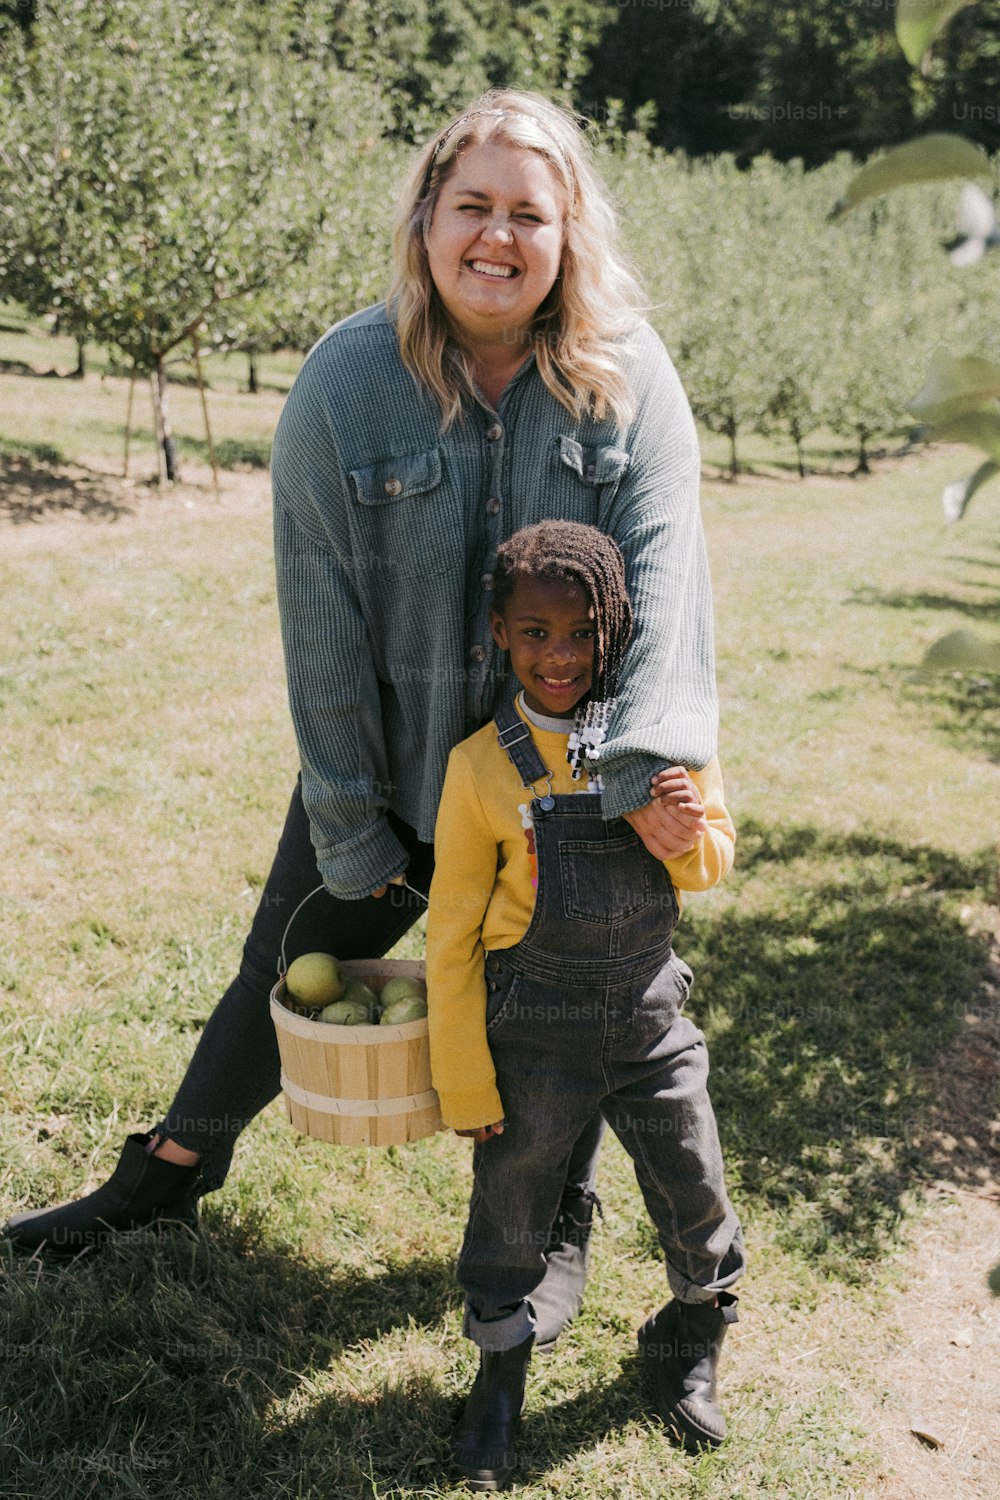 a woman holding a basket of apples while standing next to a child